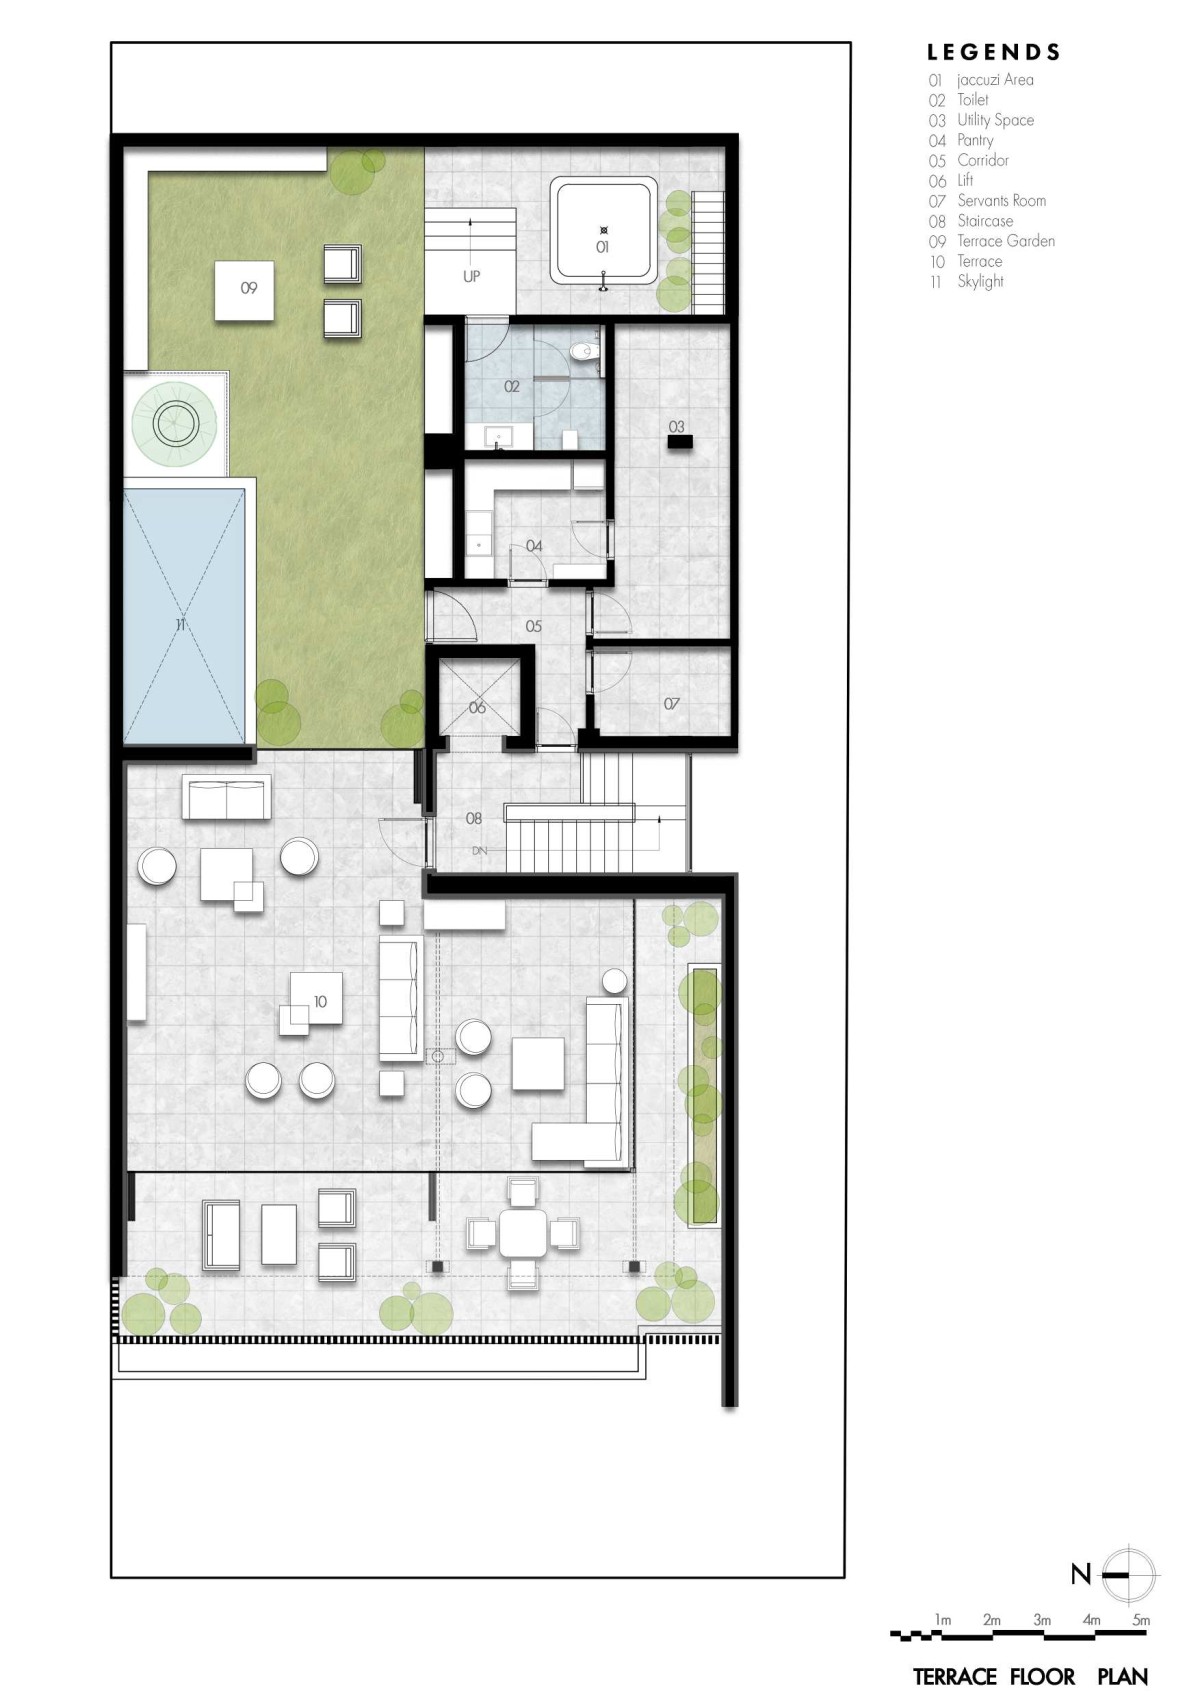 Terrace floor plan of Swatantra Residence by Spaces Architects@ka